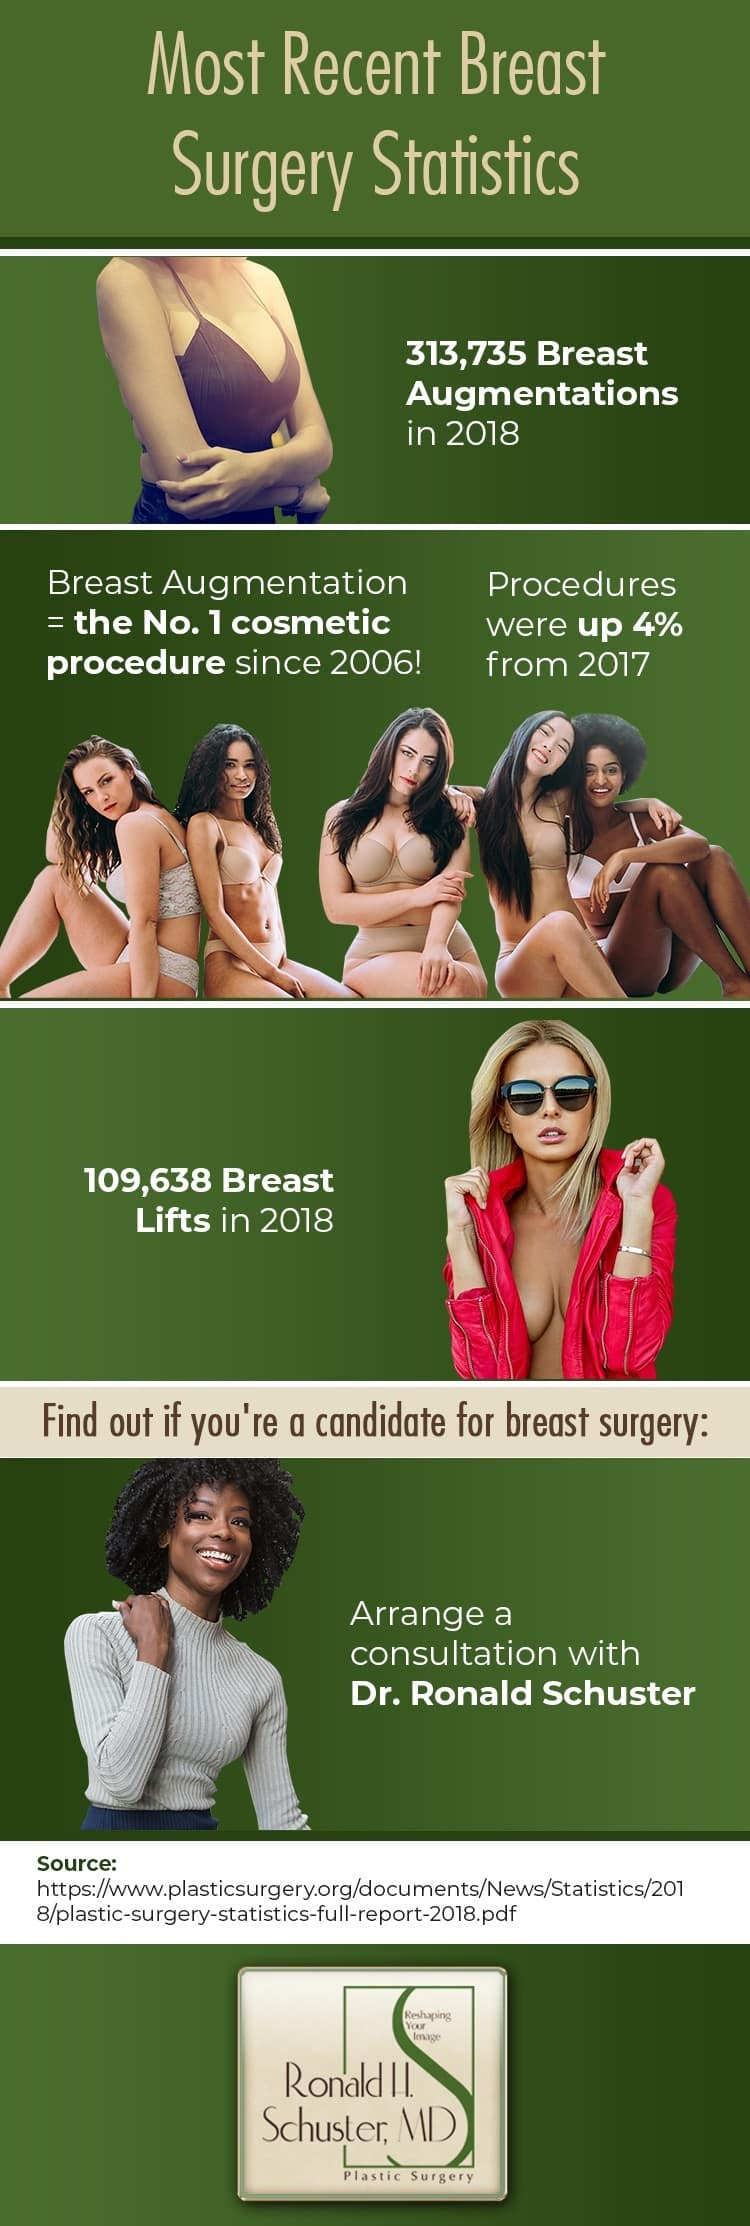 Infographic showings breast surgery statistics in the US in 2018